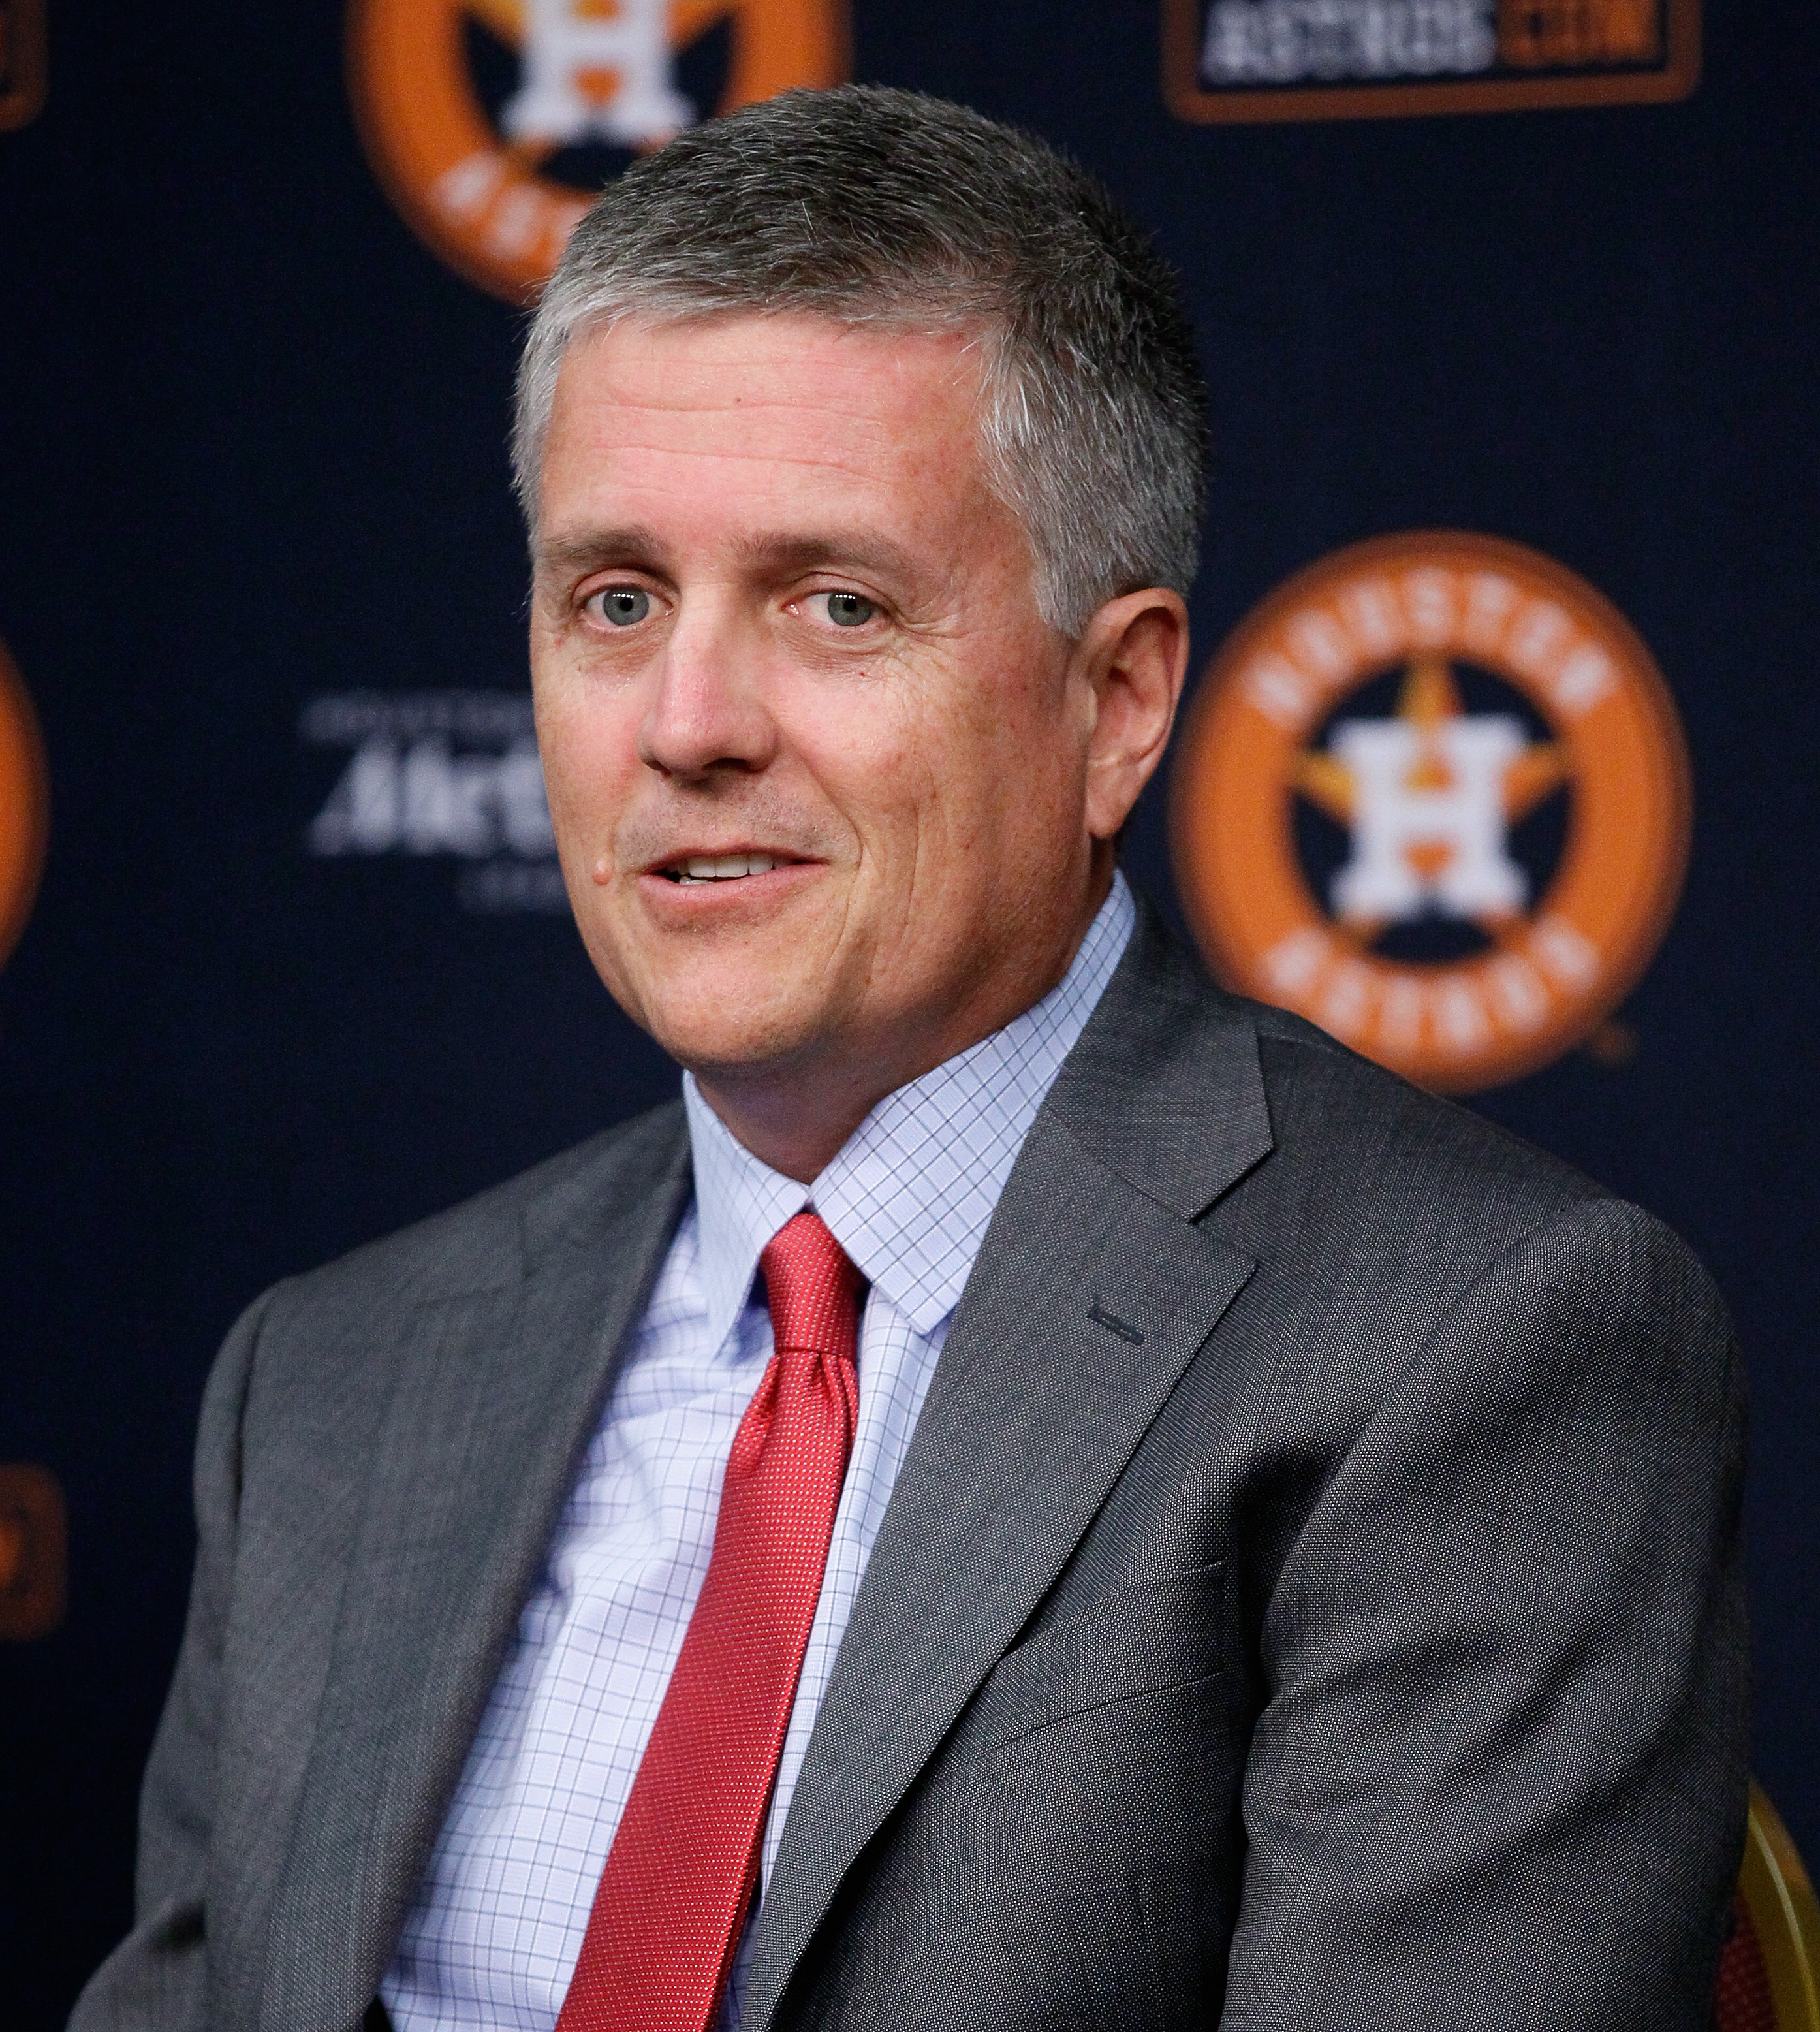 Former Cardinals employee Jeff Luhnow, now the GM of the Astros